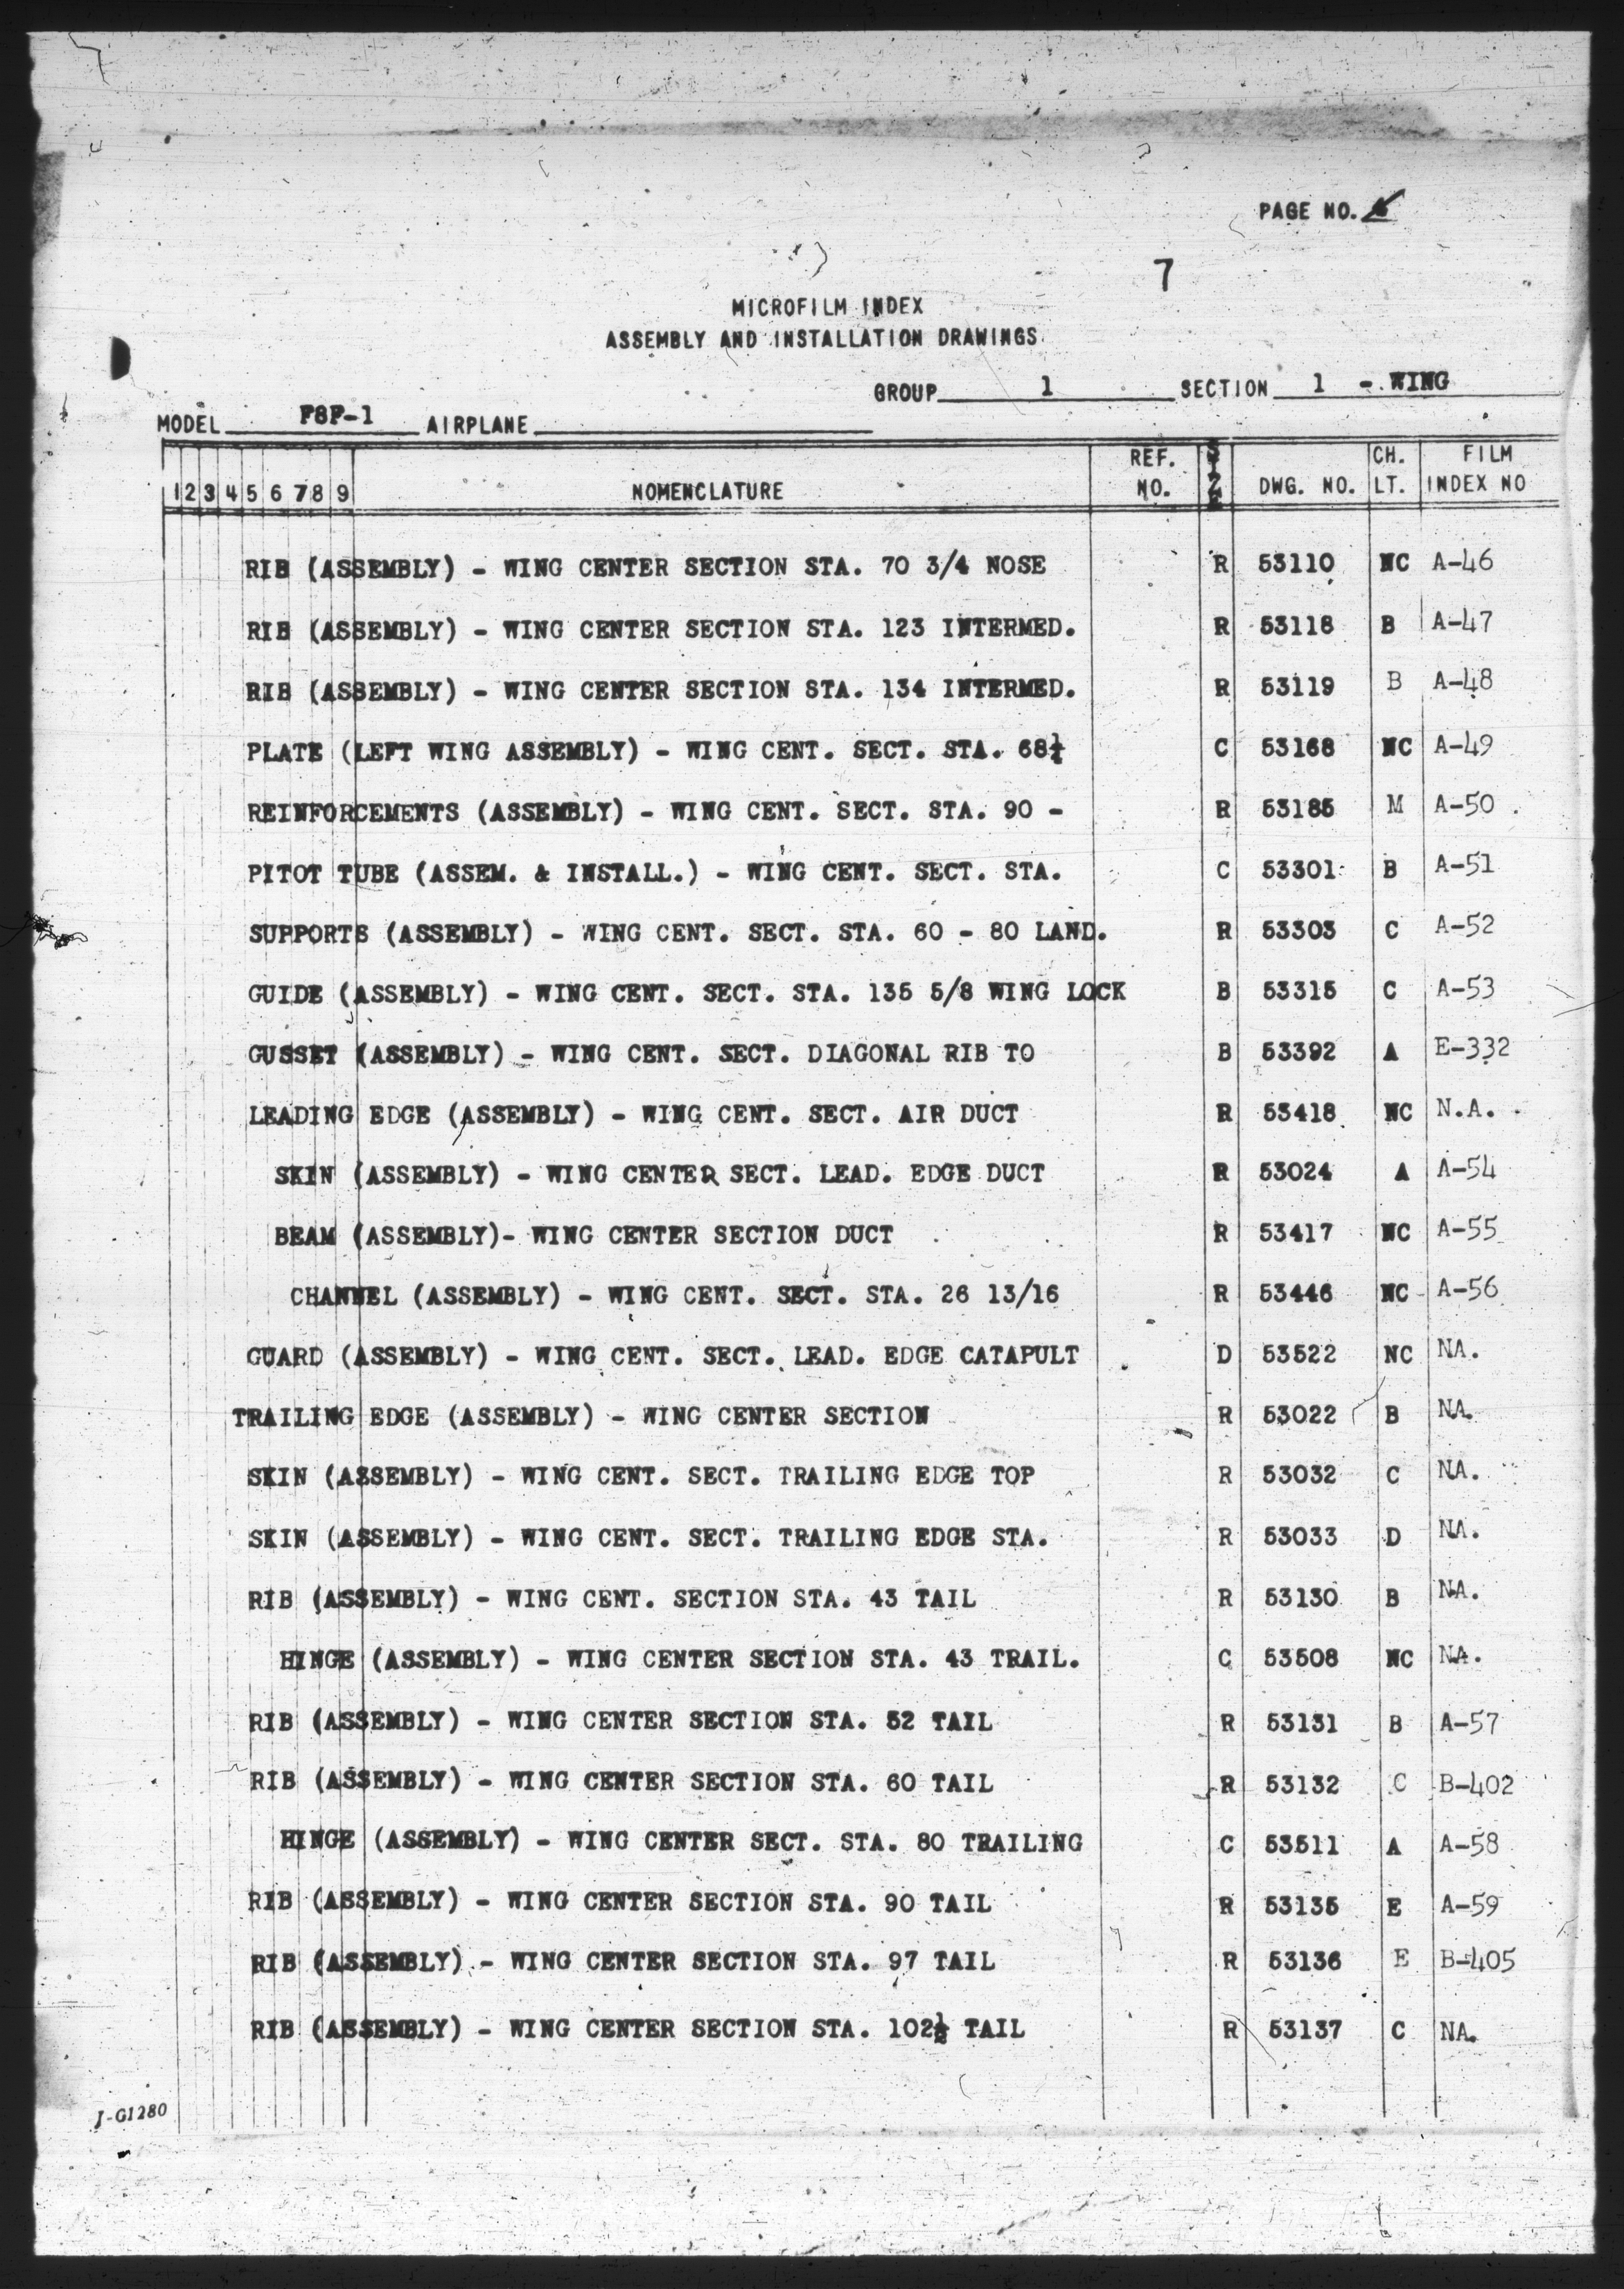 Sample page 6 from AirCorps Library document: Microfilm Index for F8F-1